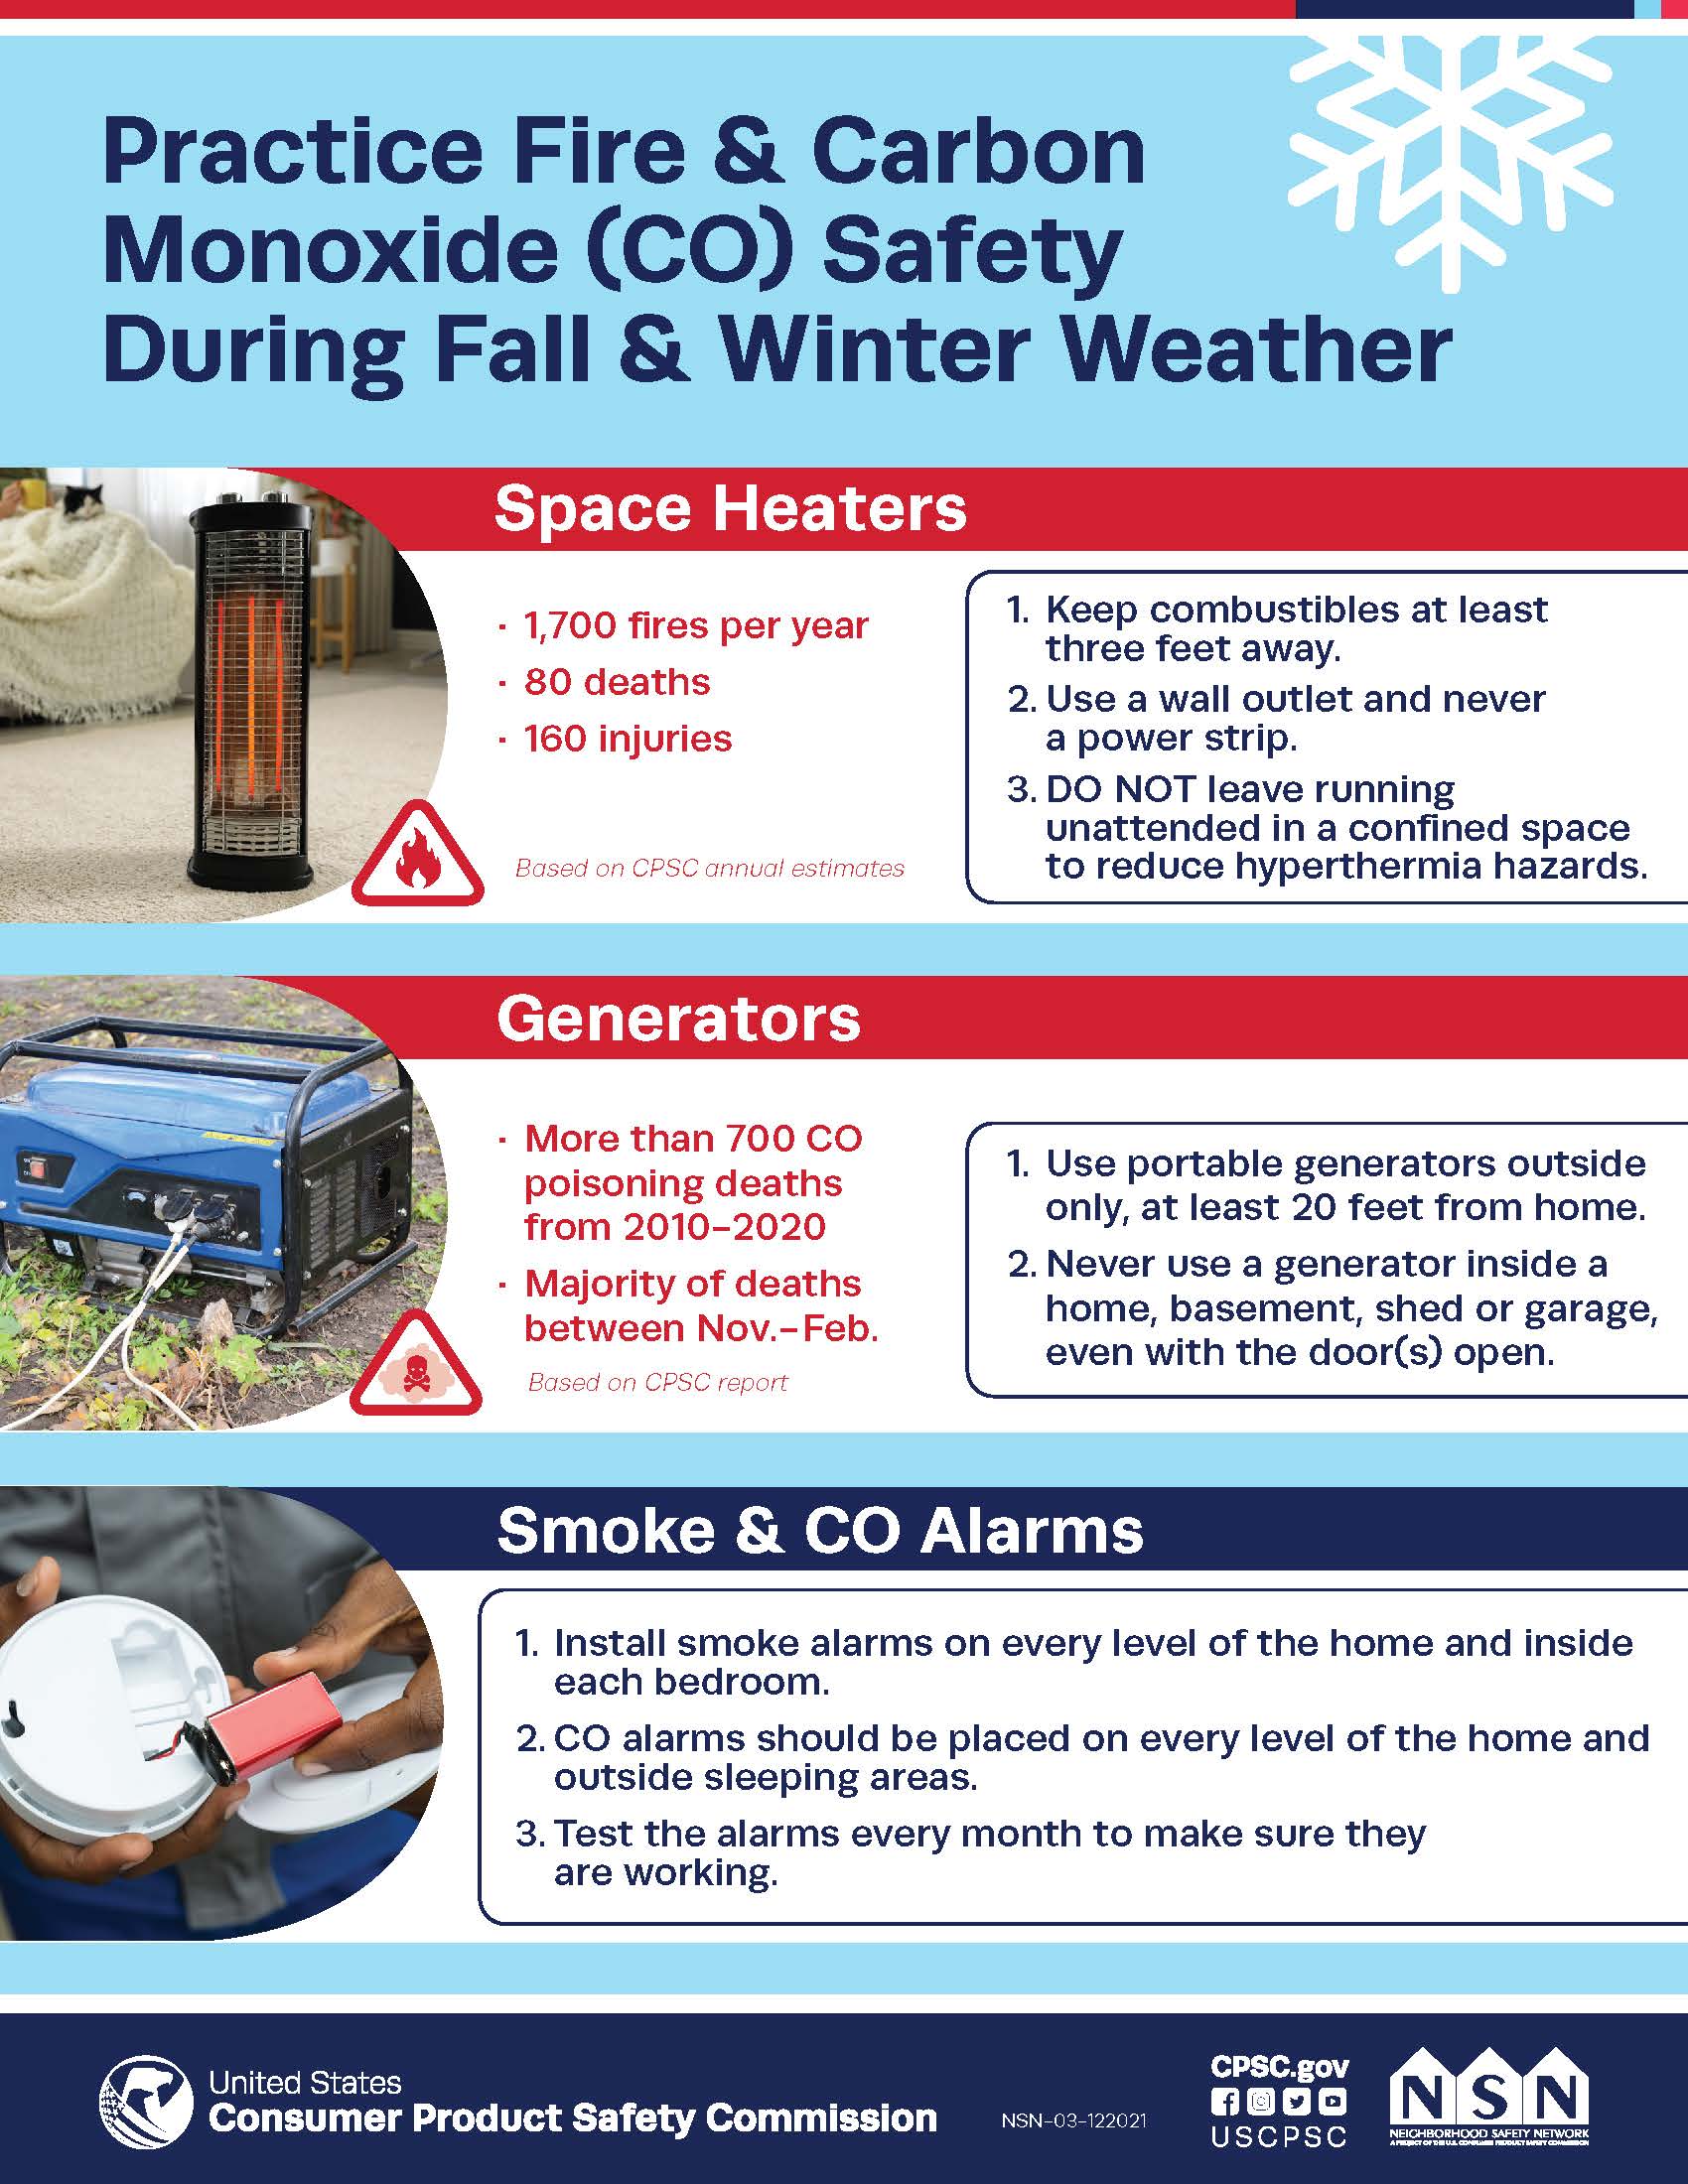 Space heater safety tips to prevent home fires